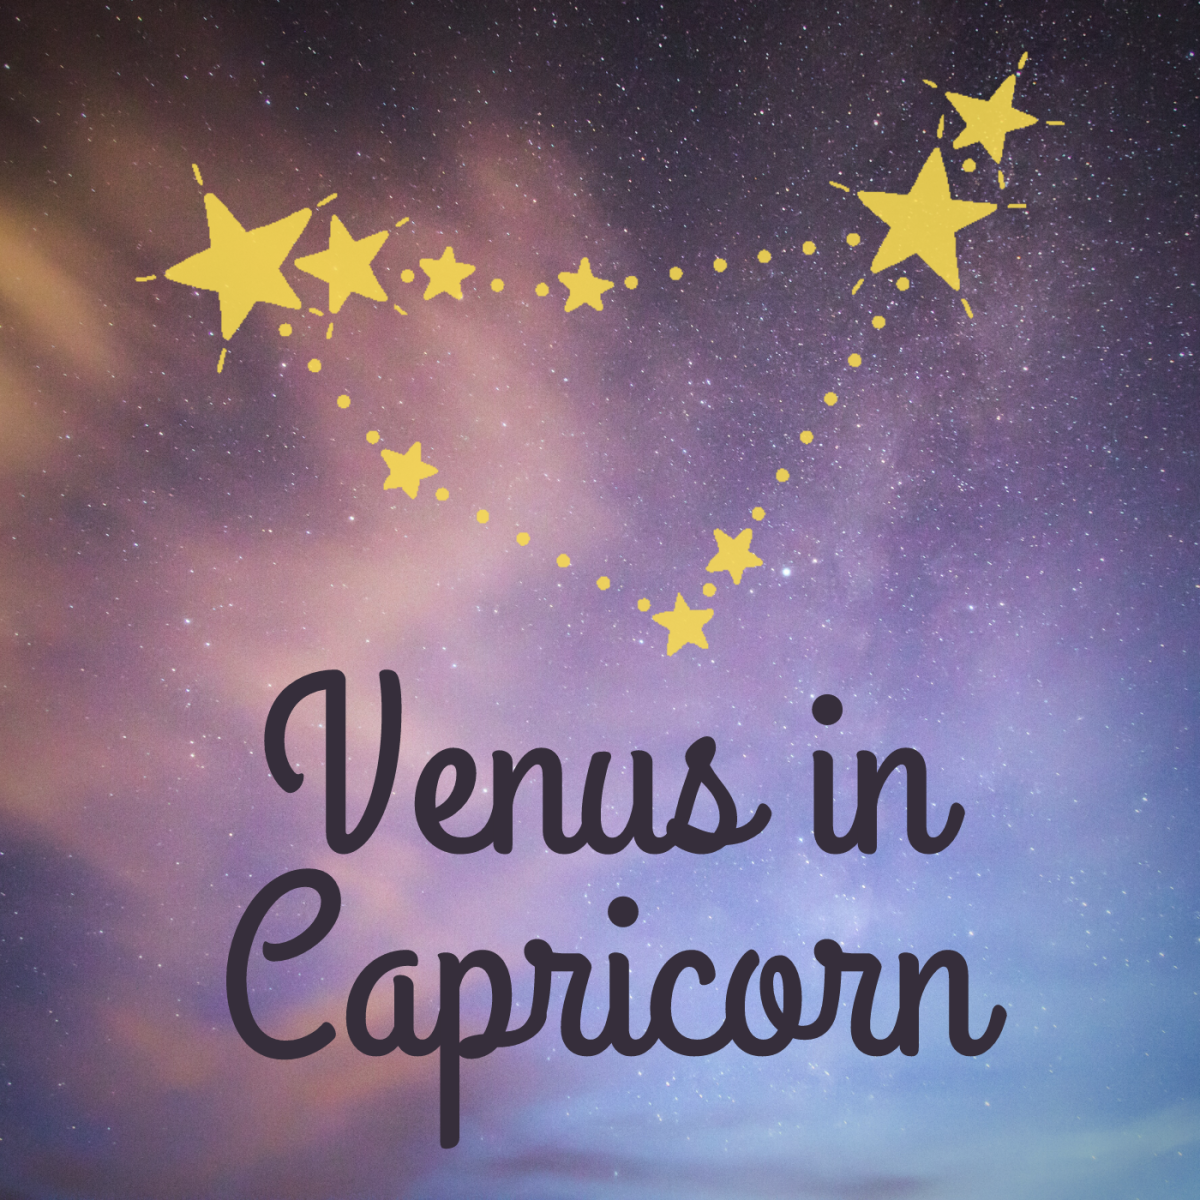 Learn what it means for your love life if you were born with Venus in Capricorn.